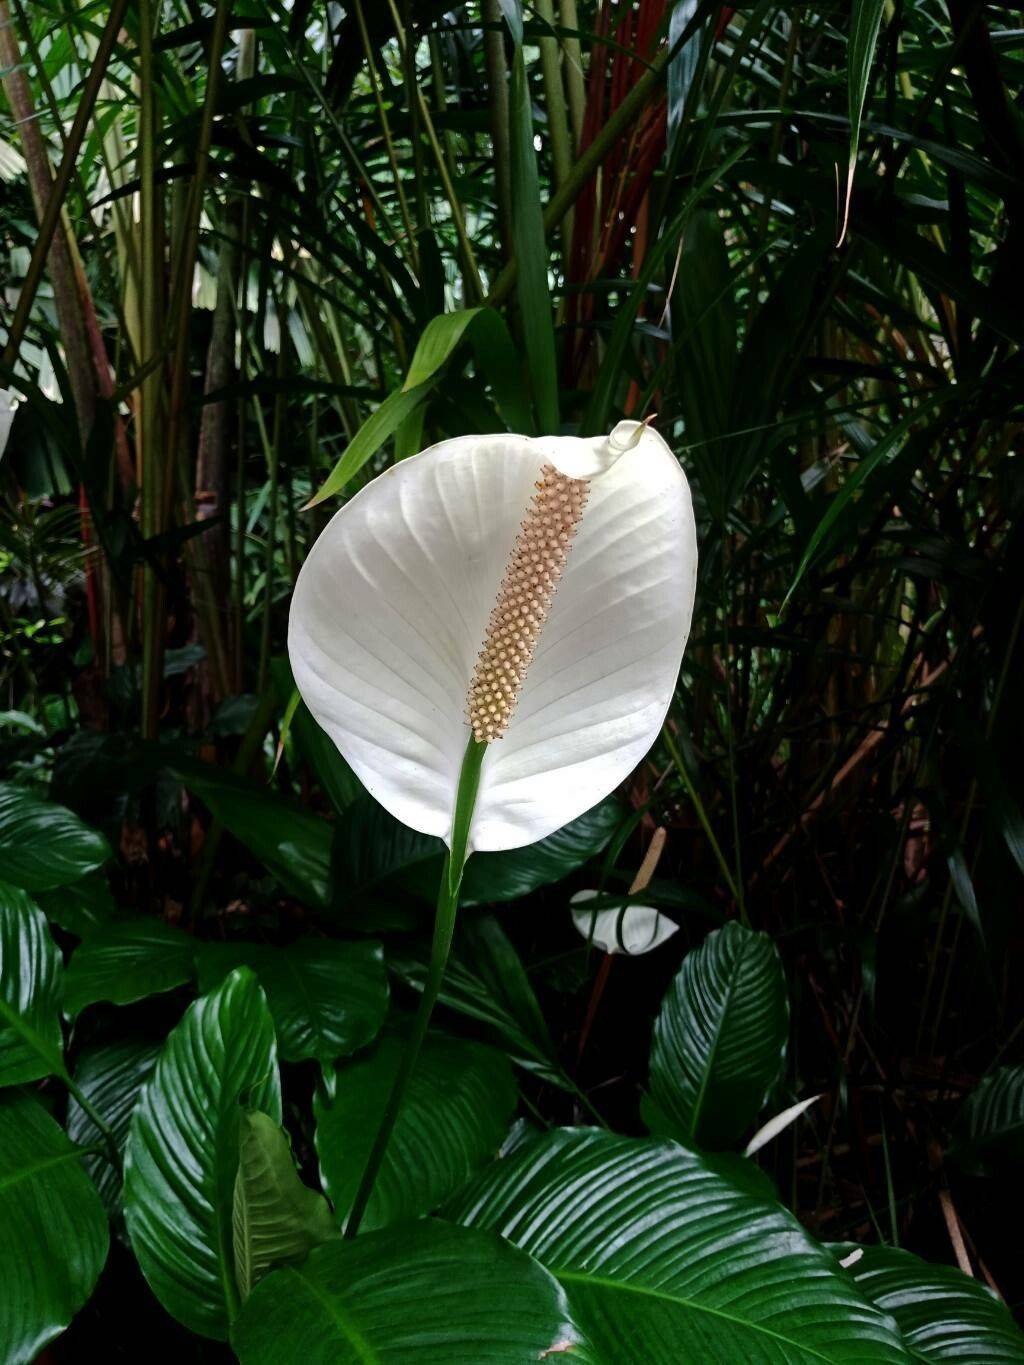 white flower with peach spadix, dark-green leaves and stems